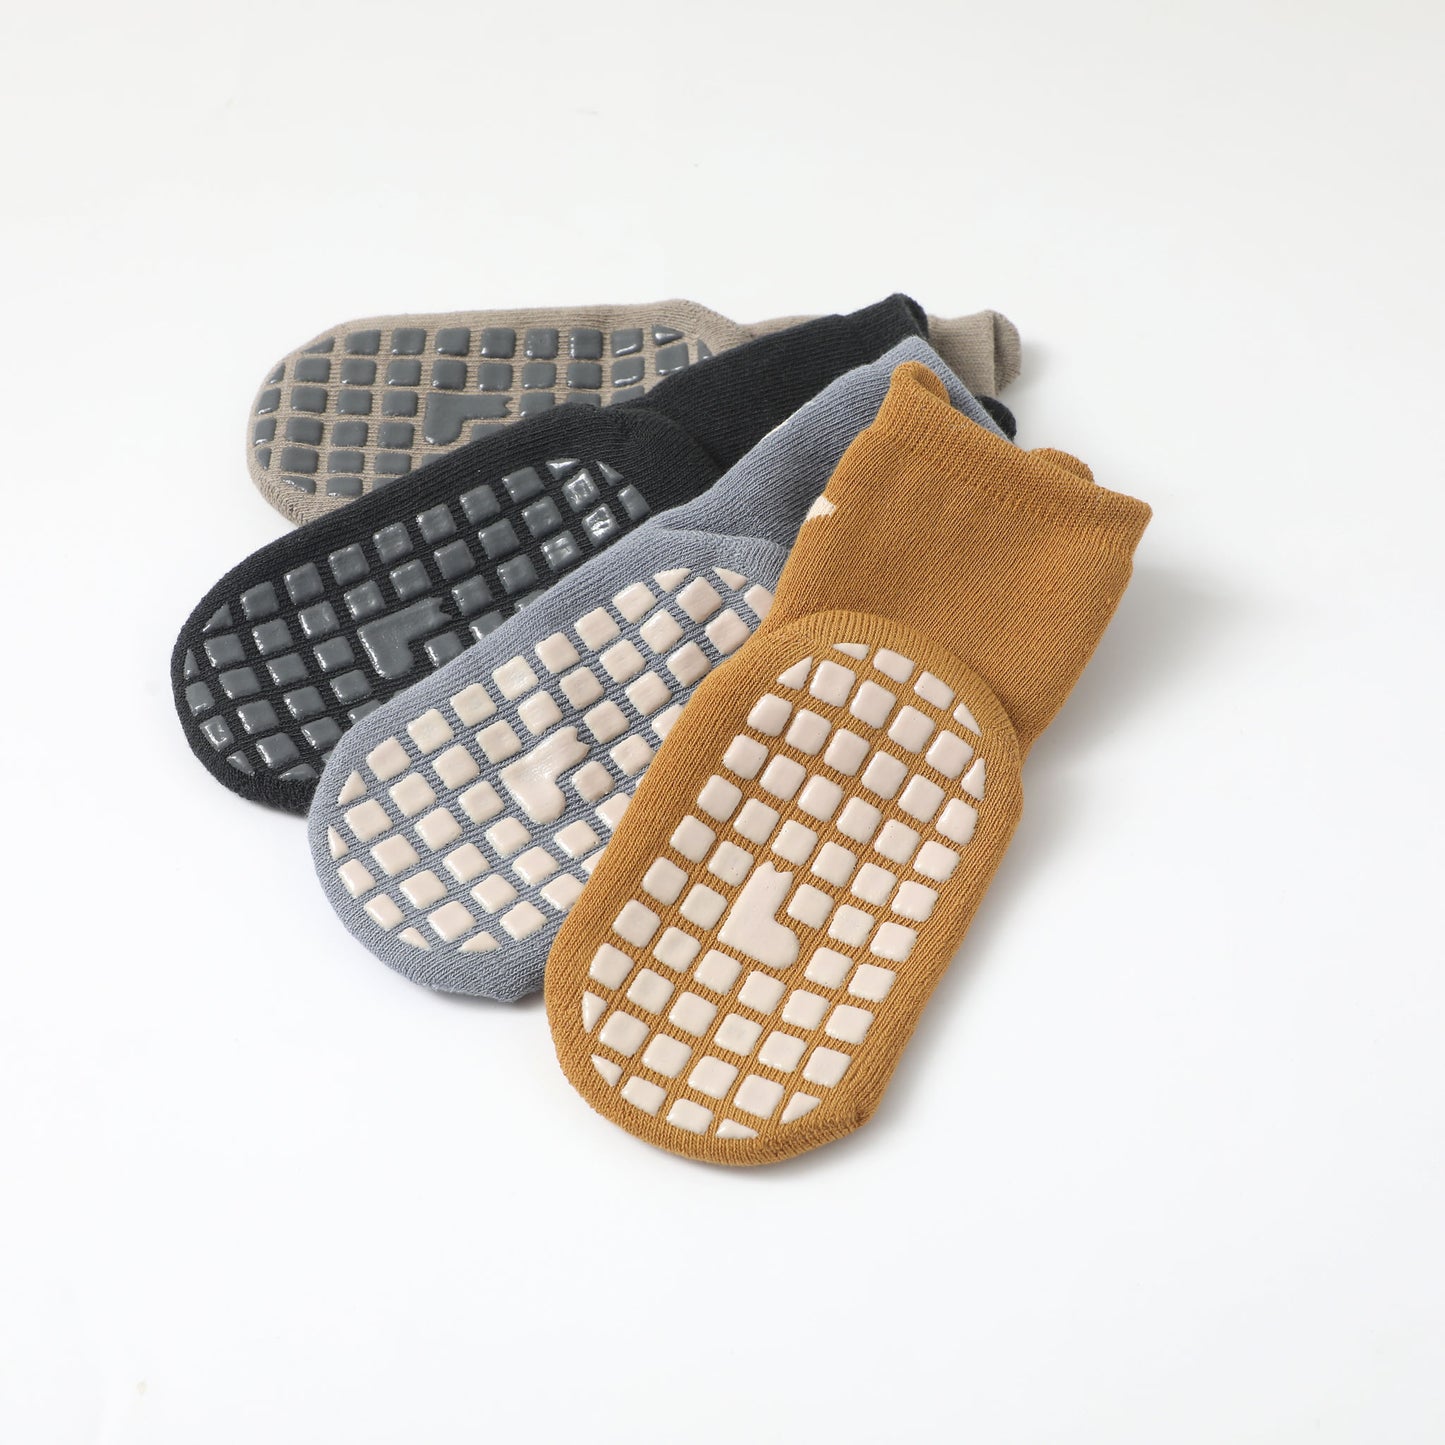 New- Critter Crew - Extra Warm - 4 Pairs of Stay-On Baby & Toddler Non-Slip Socks